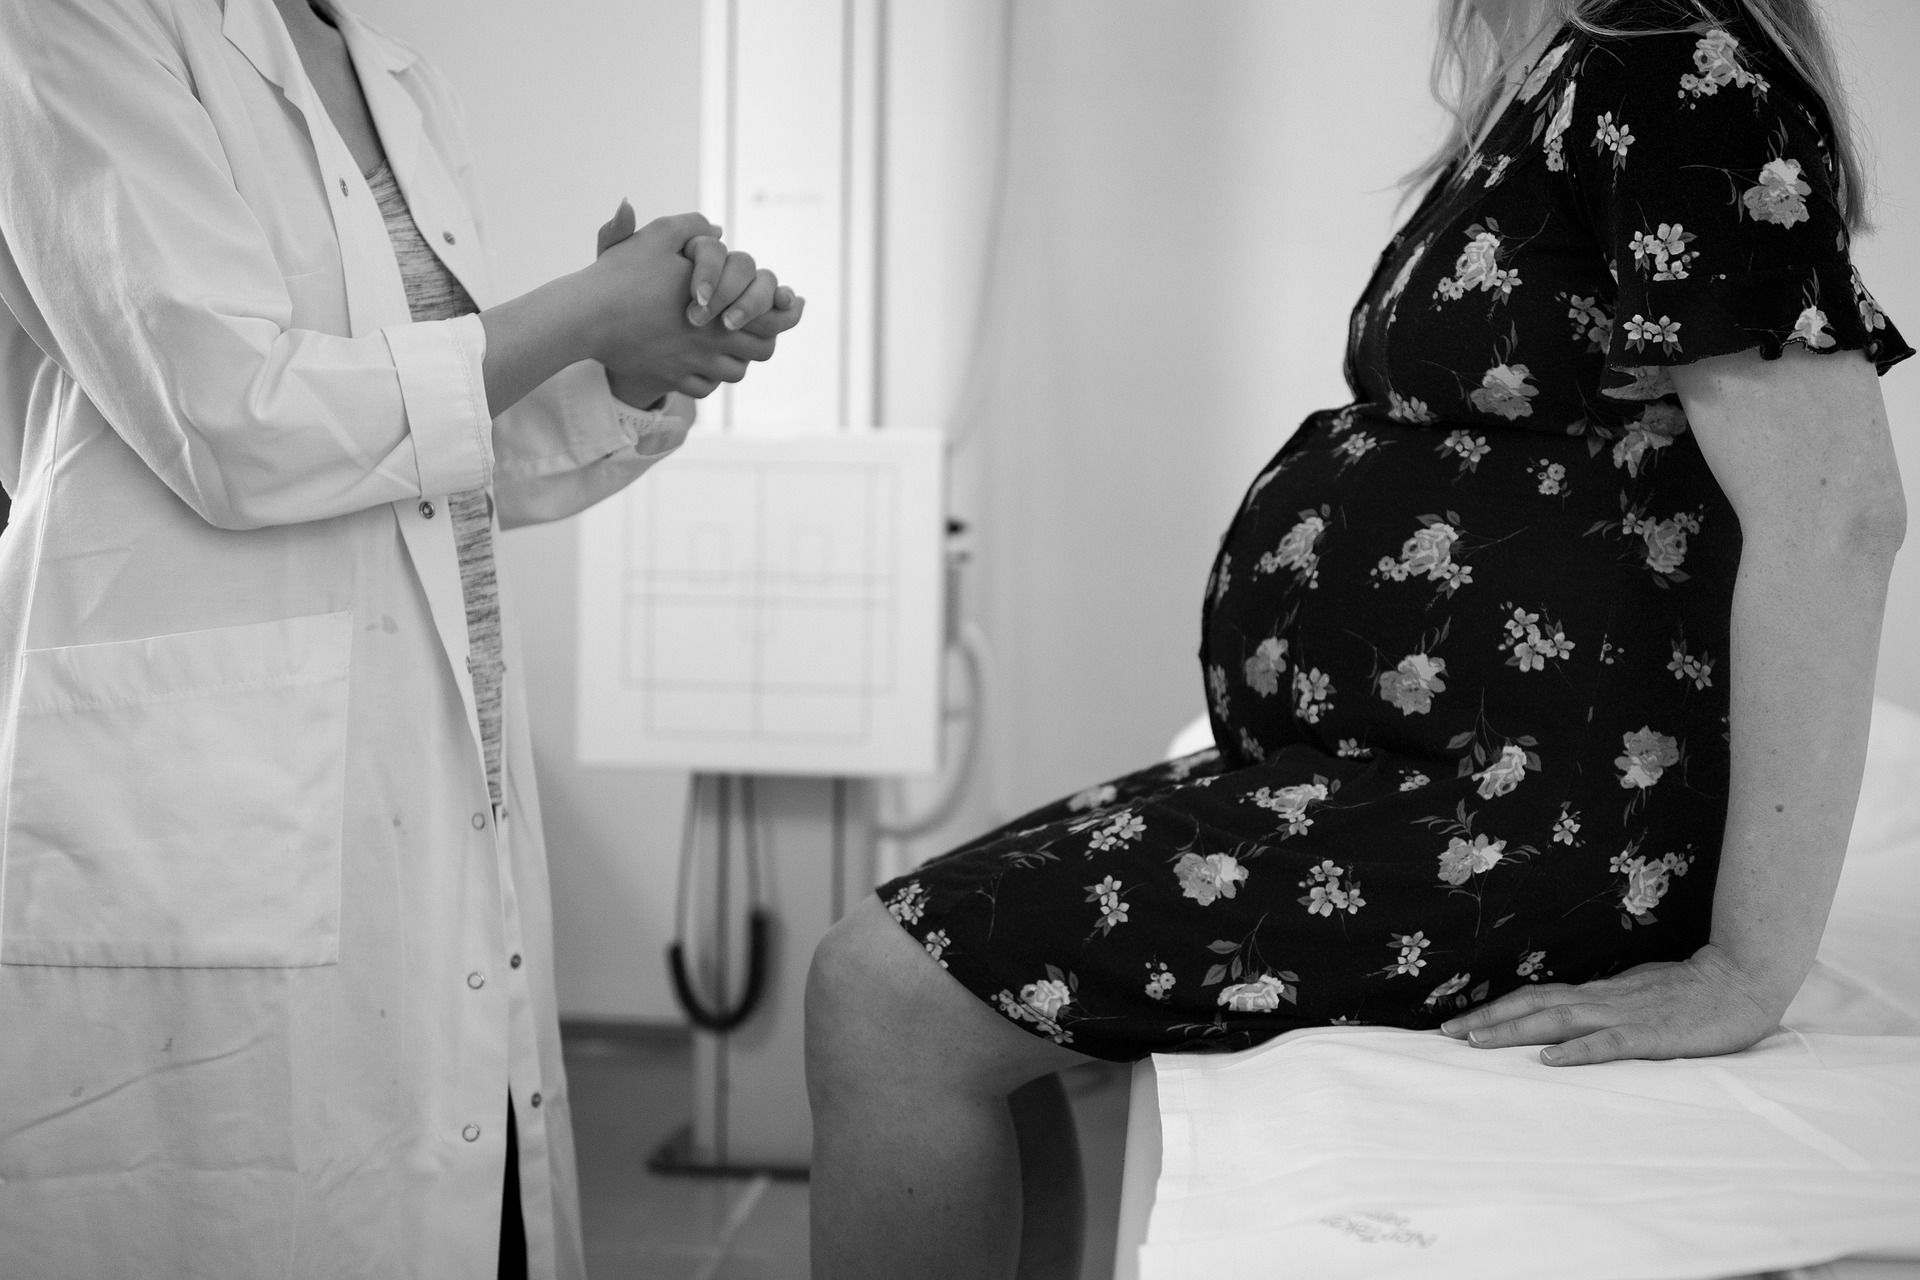 The number of rejections of fertility treatment has increased – Region of Southern Denmark